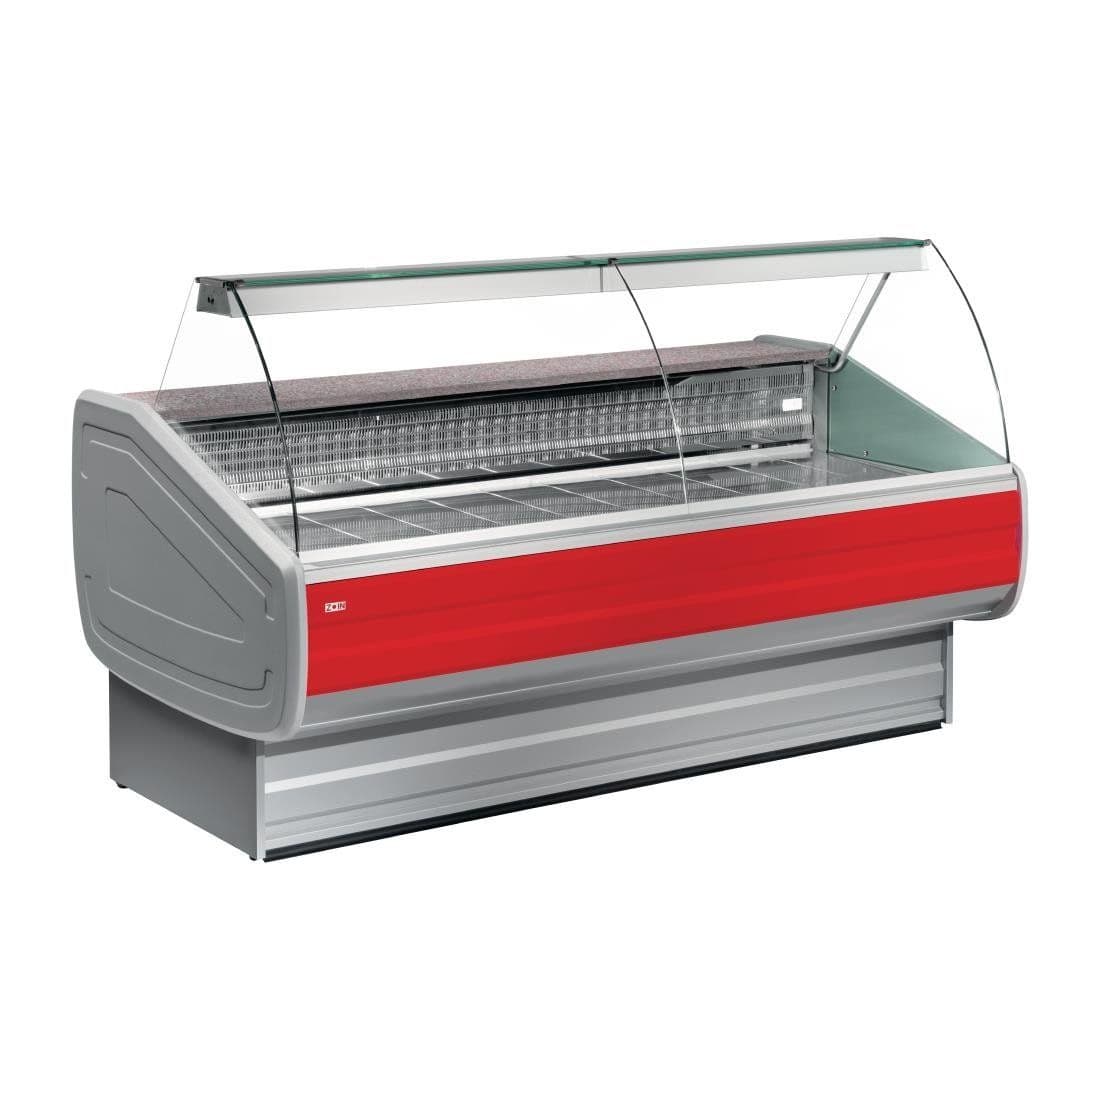 FP982-150 Zoin Melody Ventilated Butcher Serve Over Counter Chiller 1500mm MY150BC JD Catering Equipment Solutions Ltd